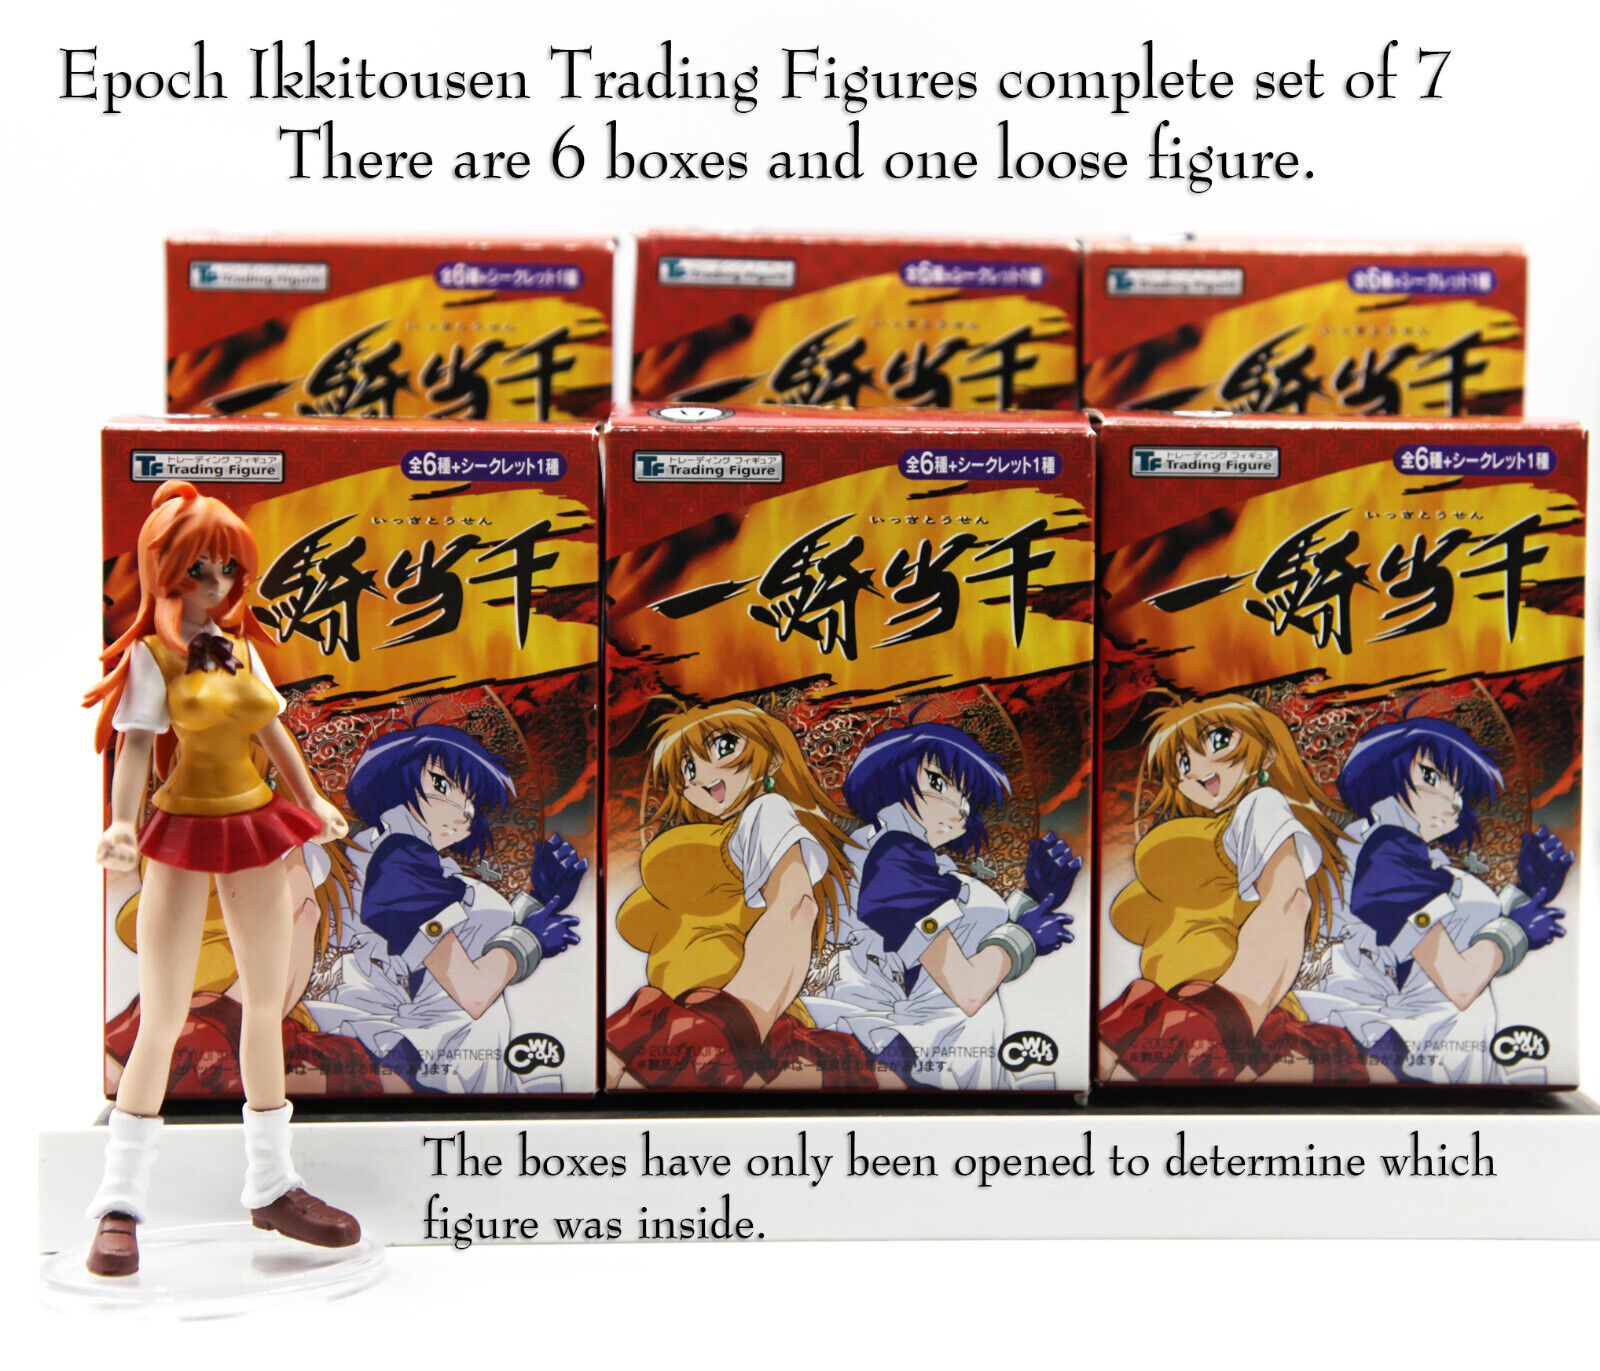 Epoch - Ikkitousen - Trading Figures - complete set of 7 - 1 loose